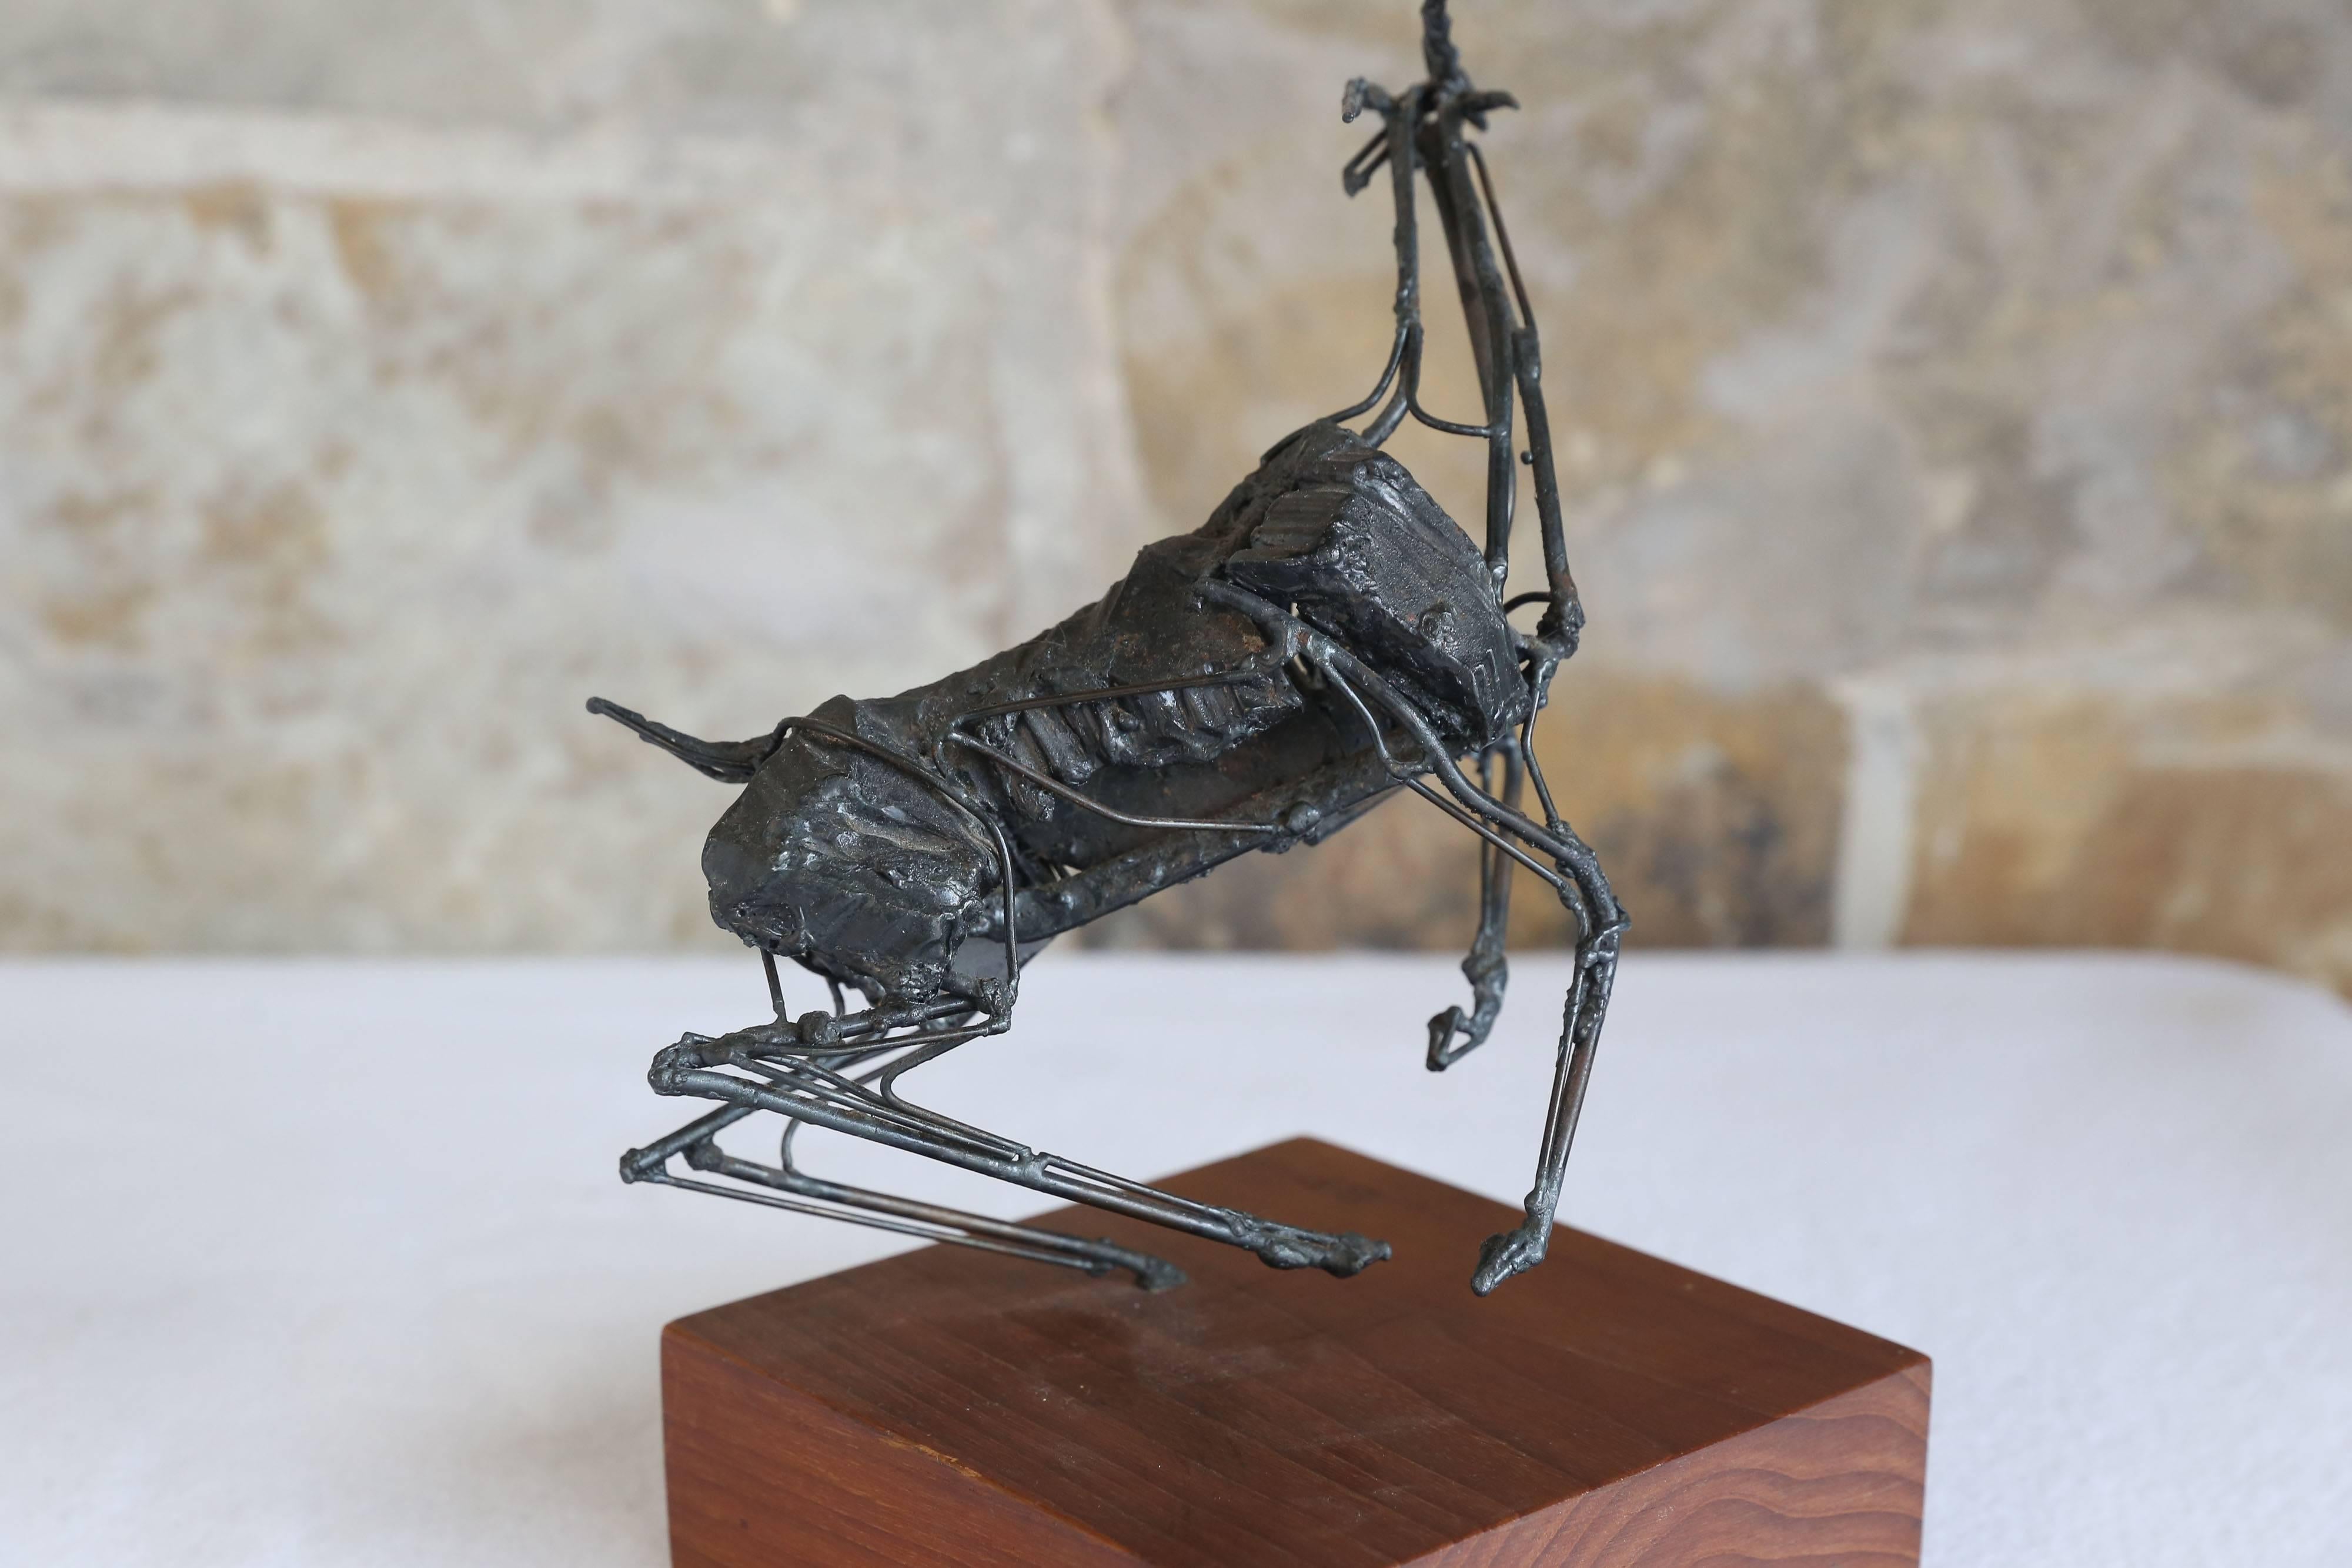 Antelope, metal rods twisted, bent and curved, carries the brazenness of the animal as it rears in anticipation. Robert "Bob" K. Fowler (1931-2010) featured nature at its best. This fantastic sculpture by the well-known Texas artist is